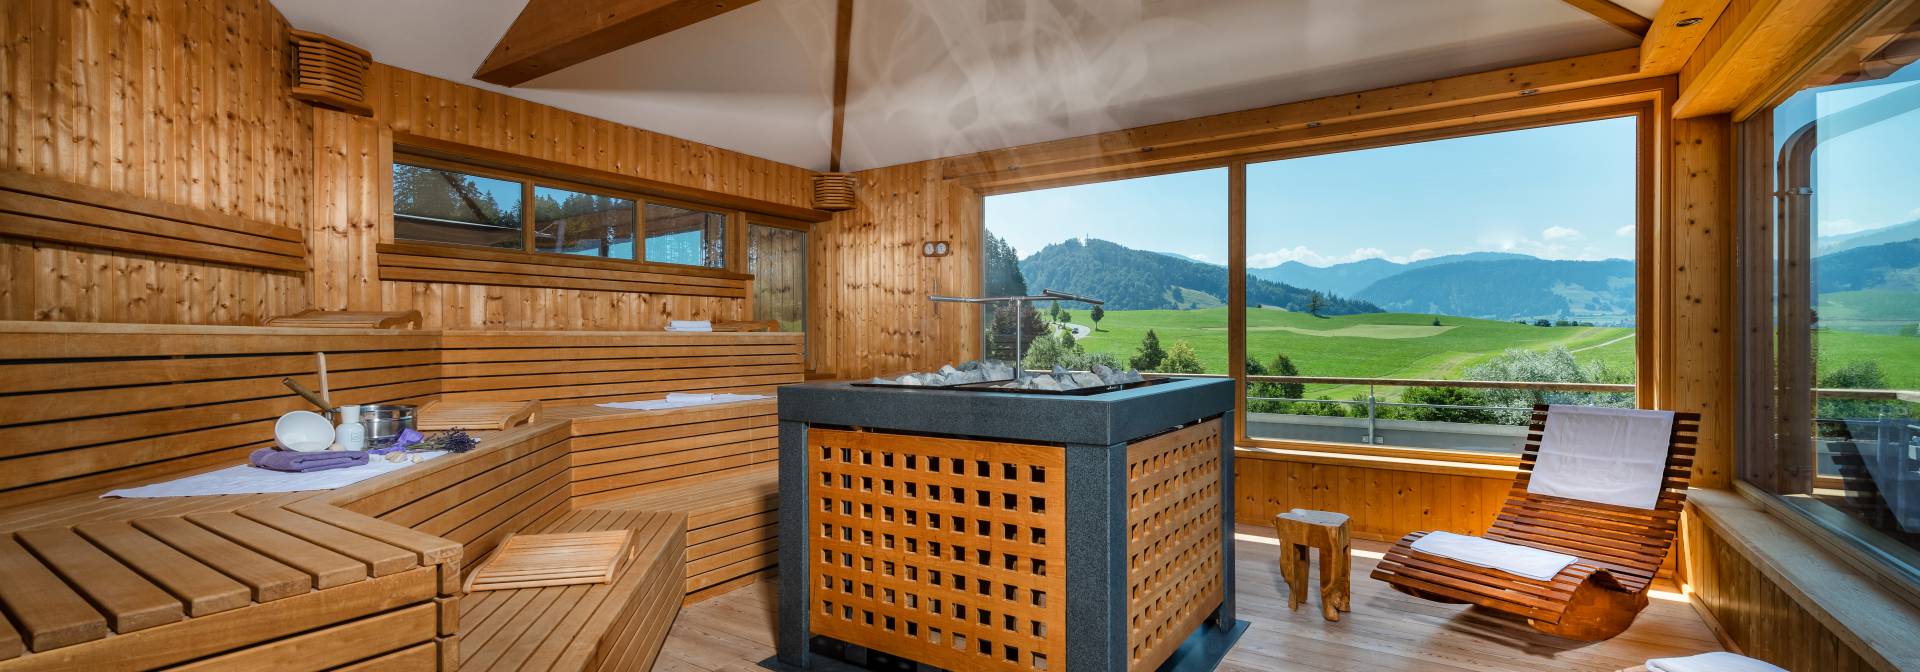 Panorama sauna with breathtaking moutain views